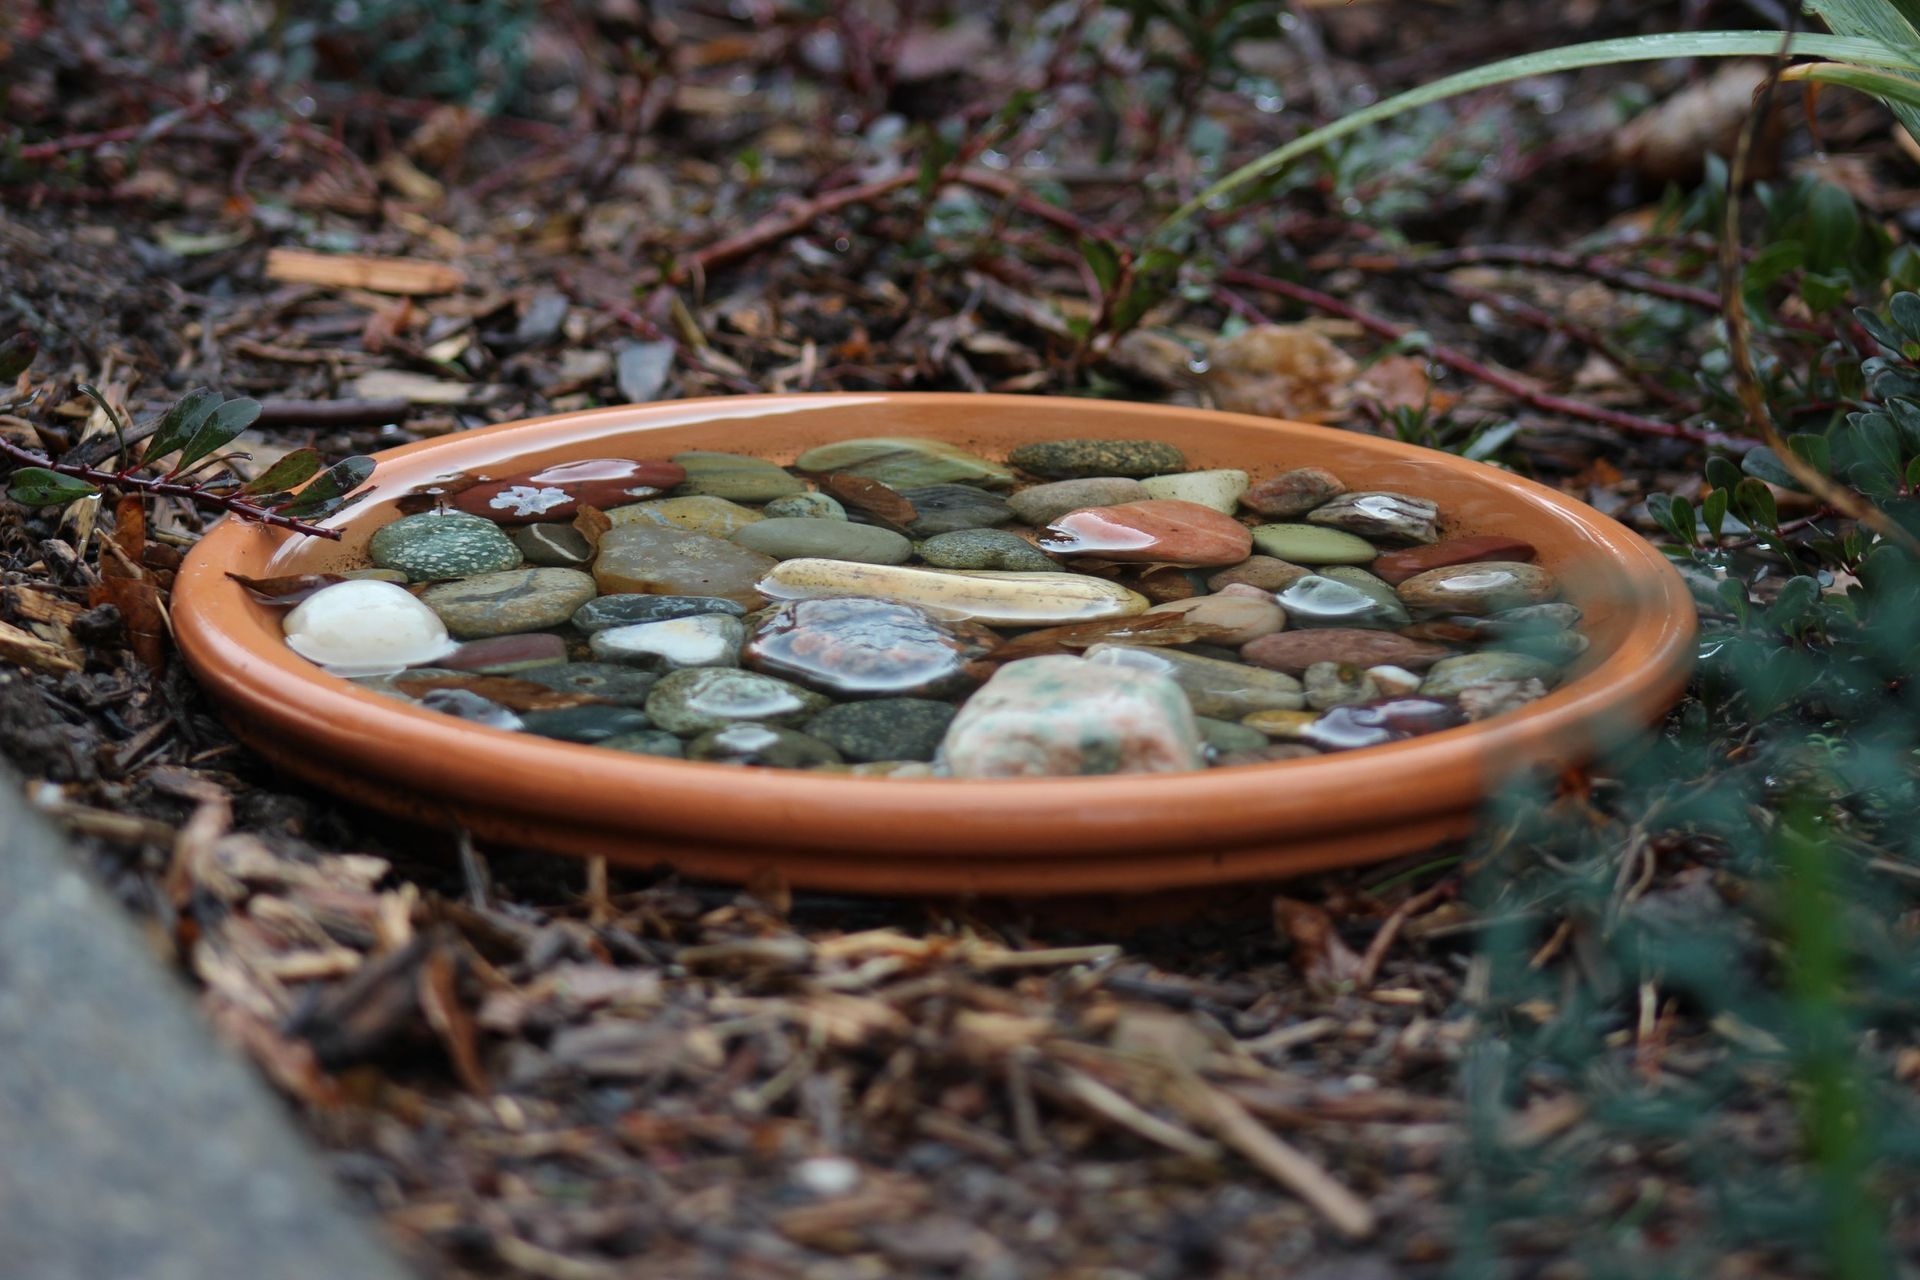 shallow dish of water and rocks